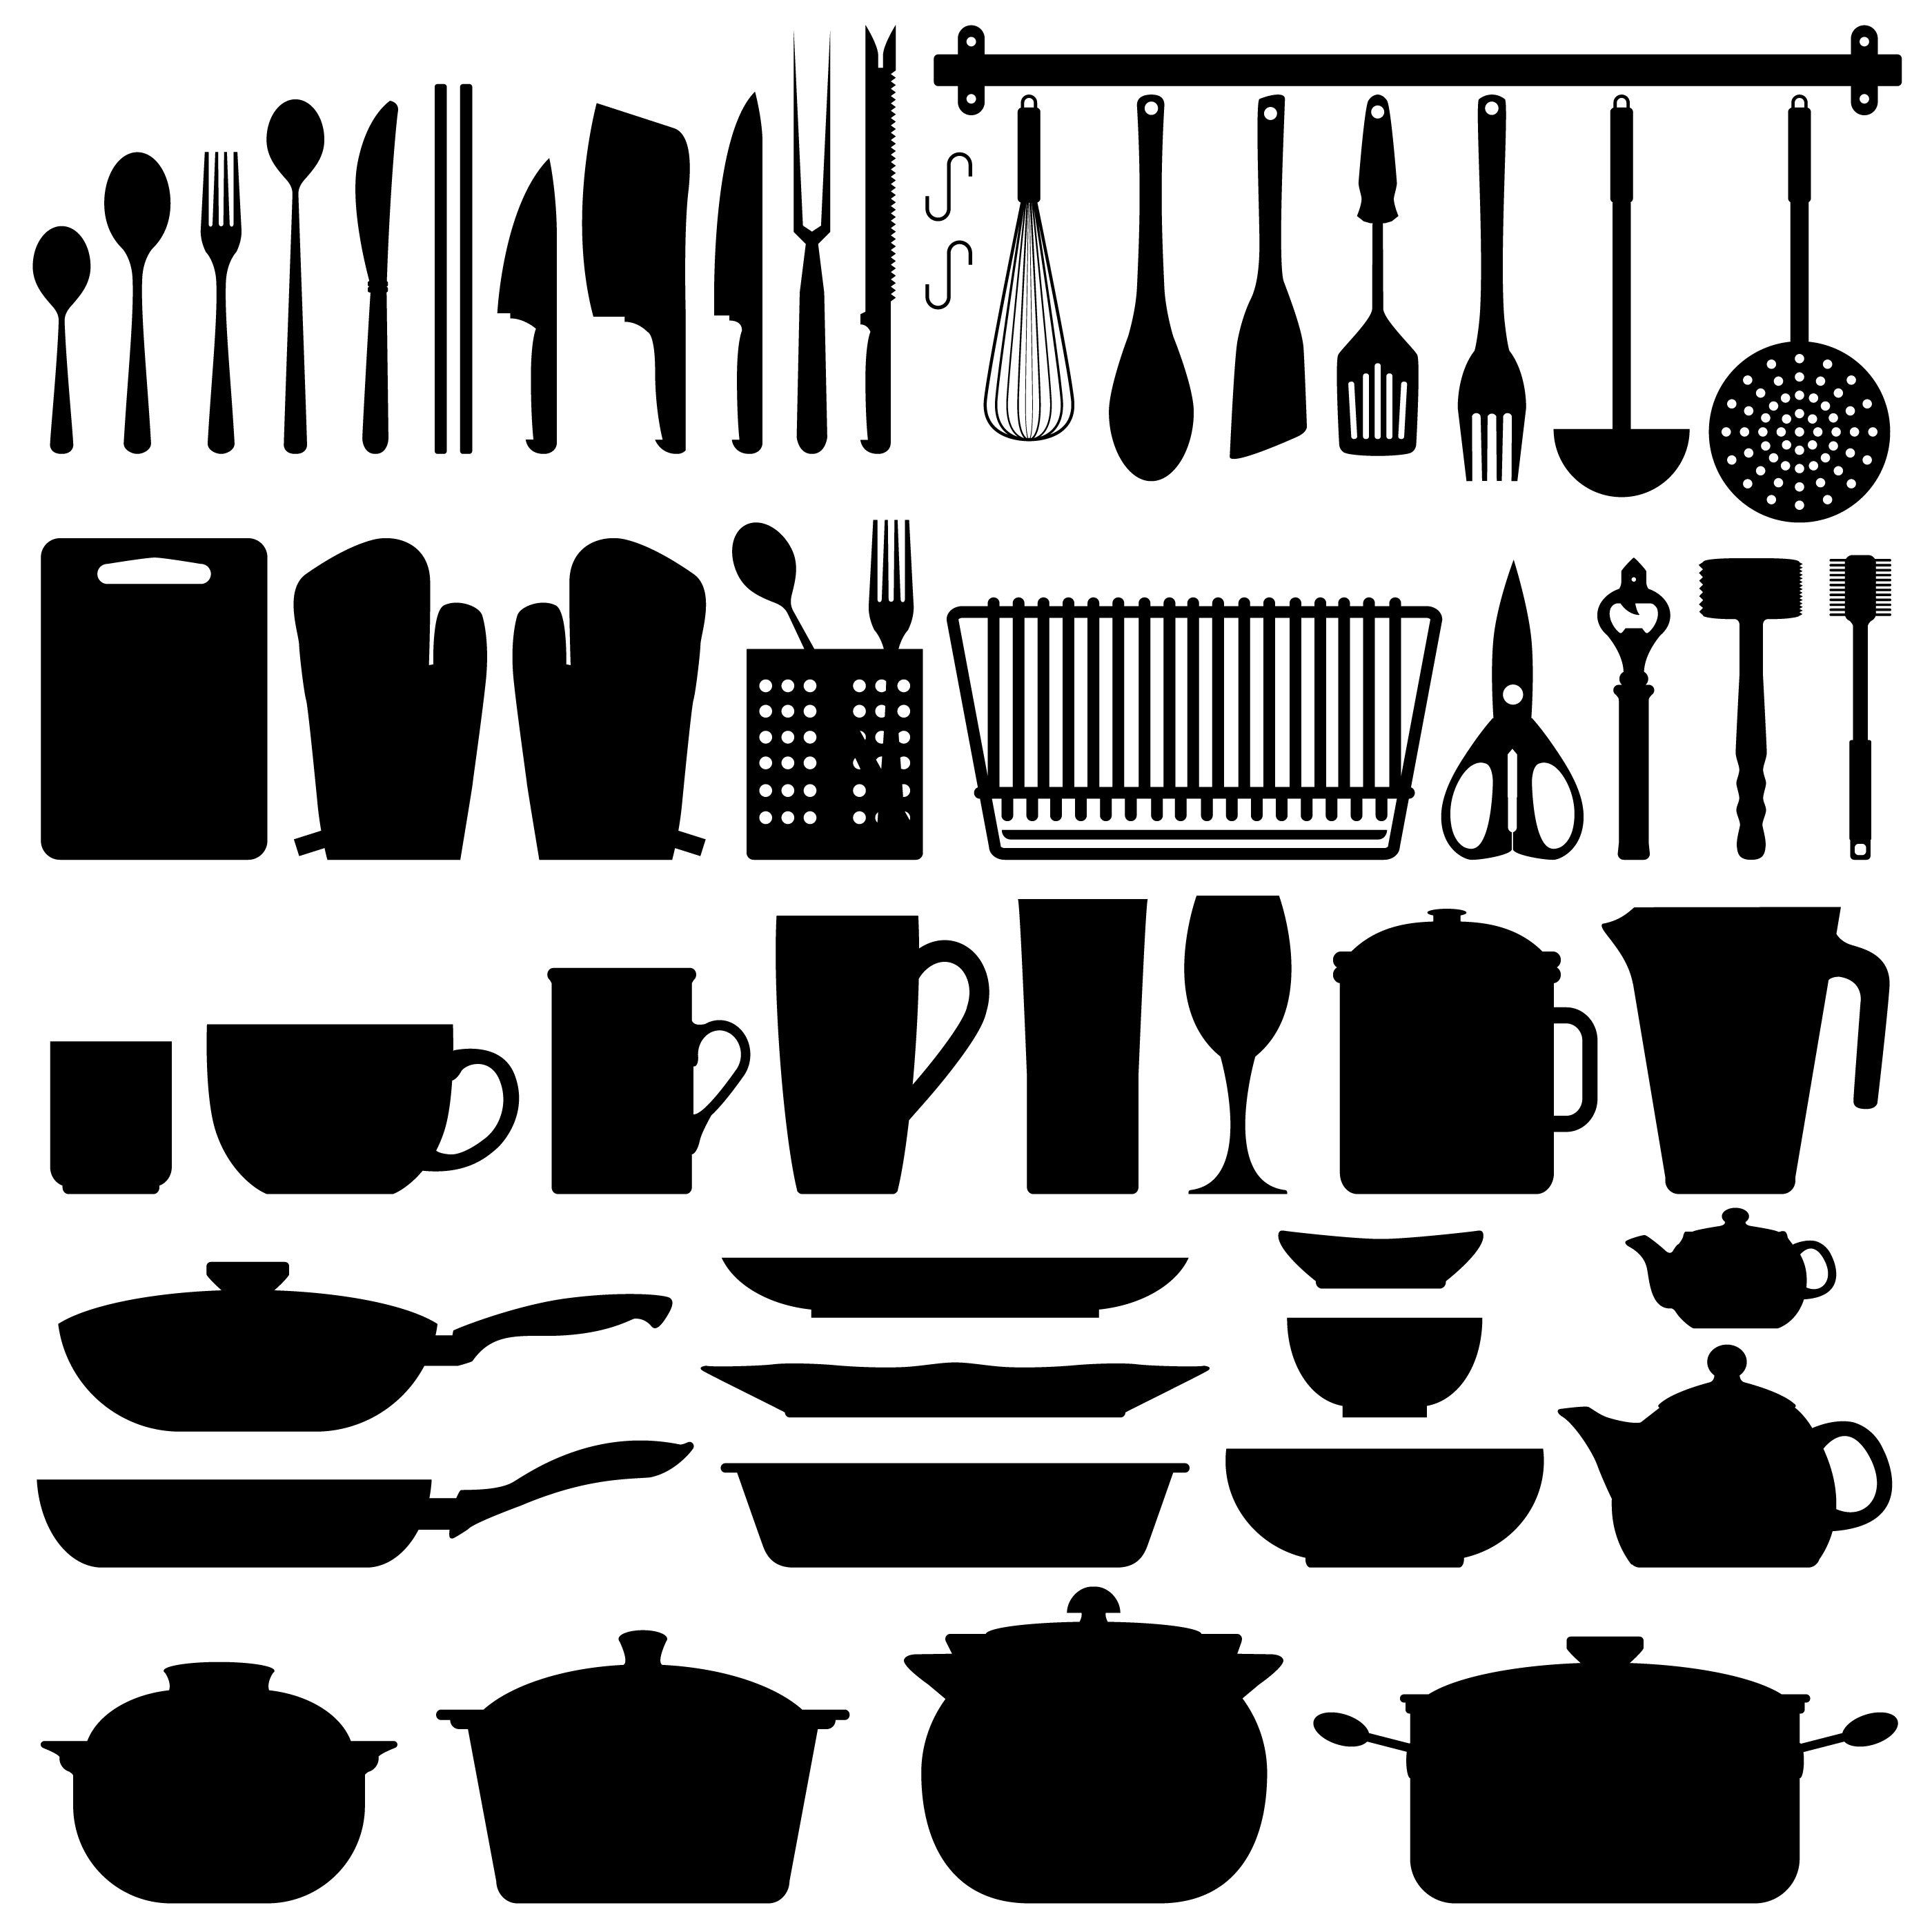 Kitchen utensils illustrations set. Cooking, dinner service, with names.  Black silhuettes of kitchenware with white outlines. Stock Vector